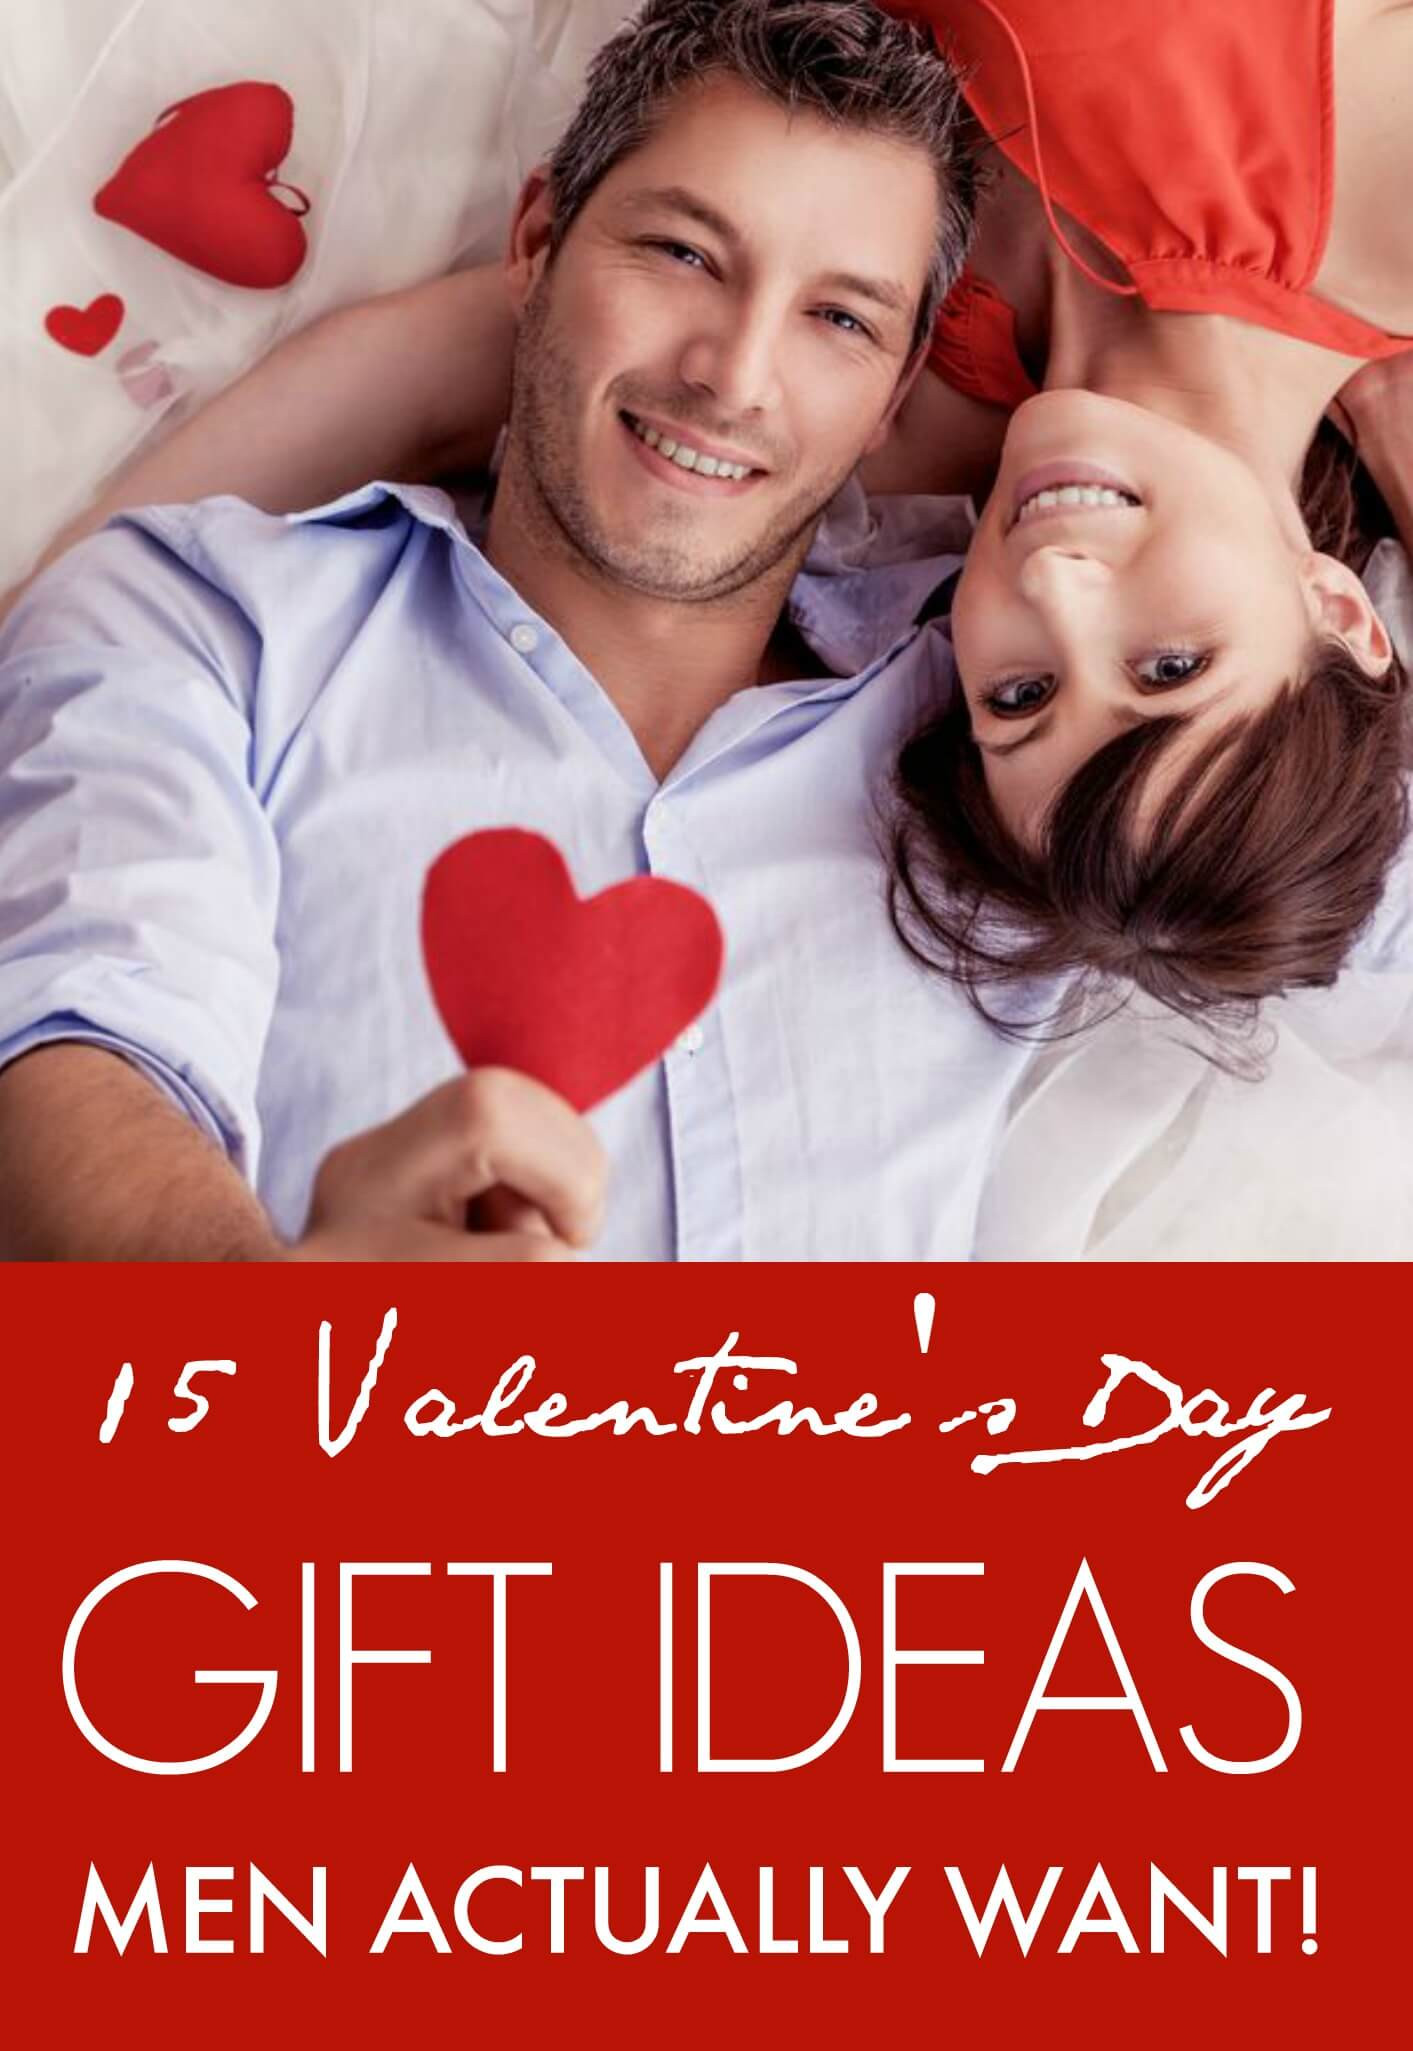 Valentines Day Gift Ideas For Guys
 15 Valentine’s Day Gift ideas Men Actually Want